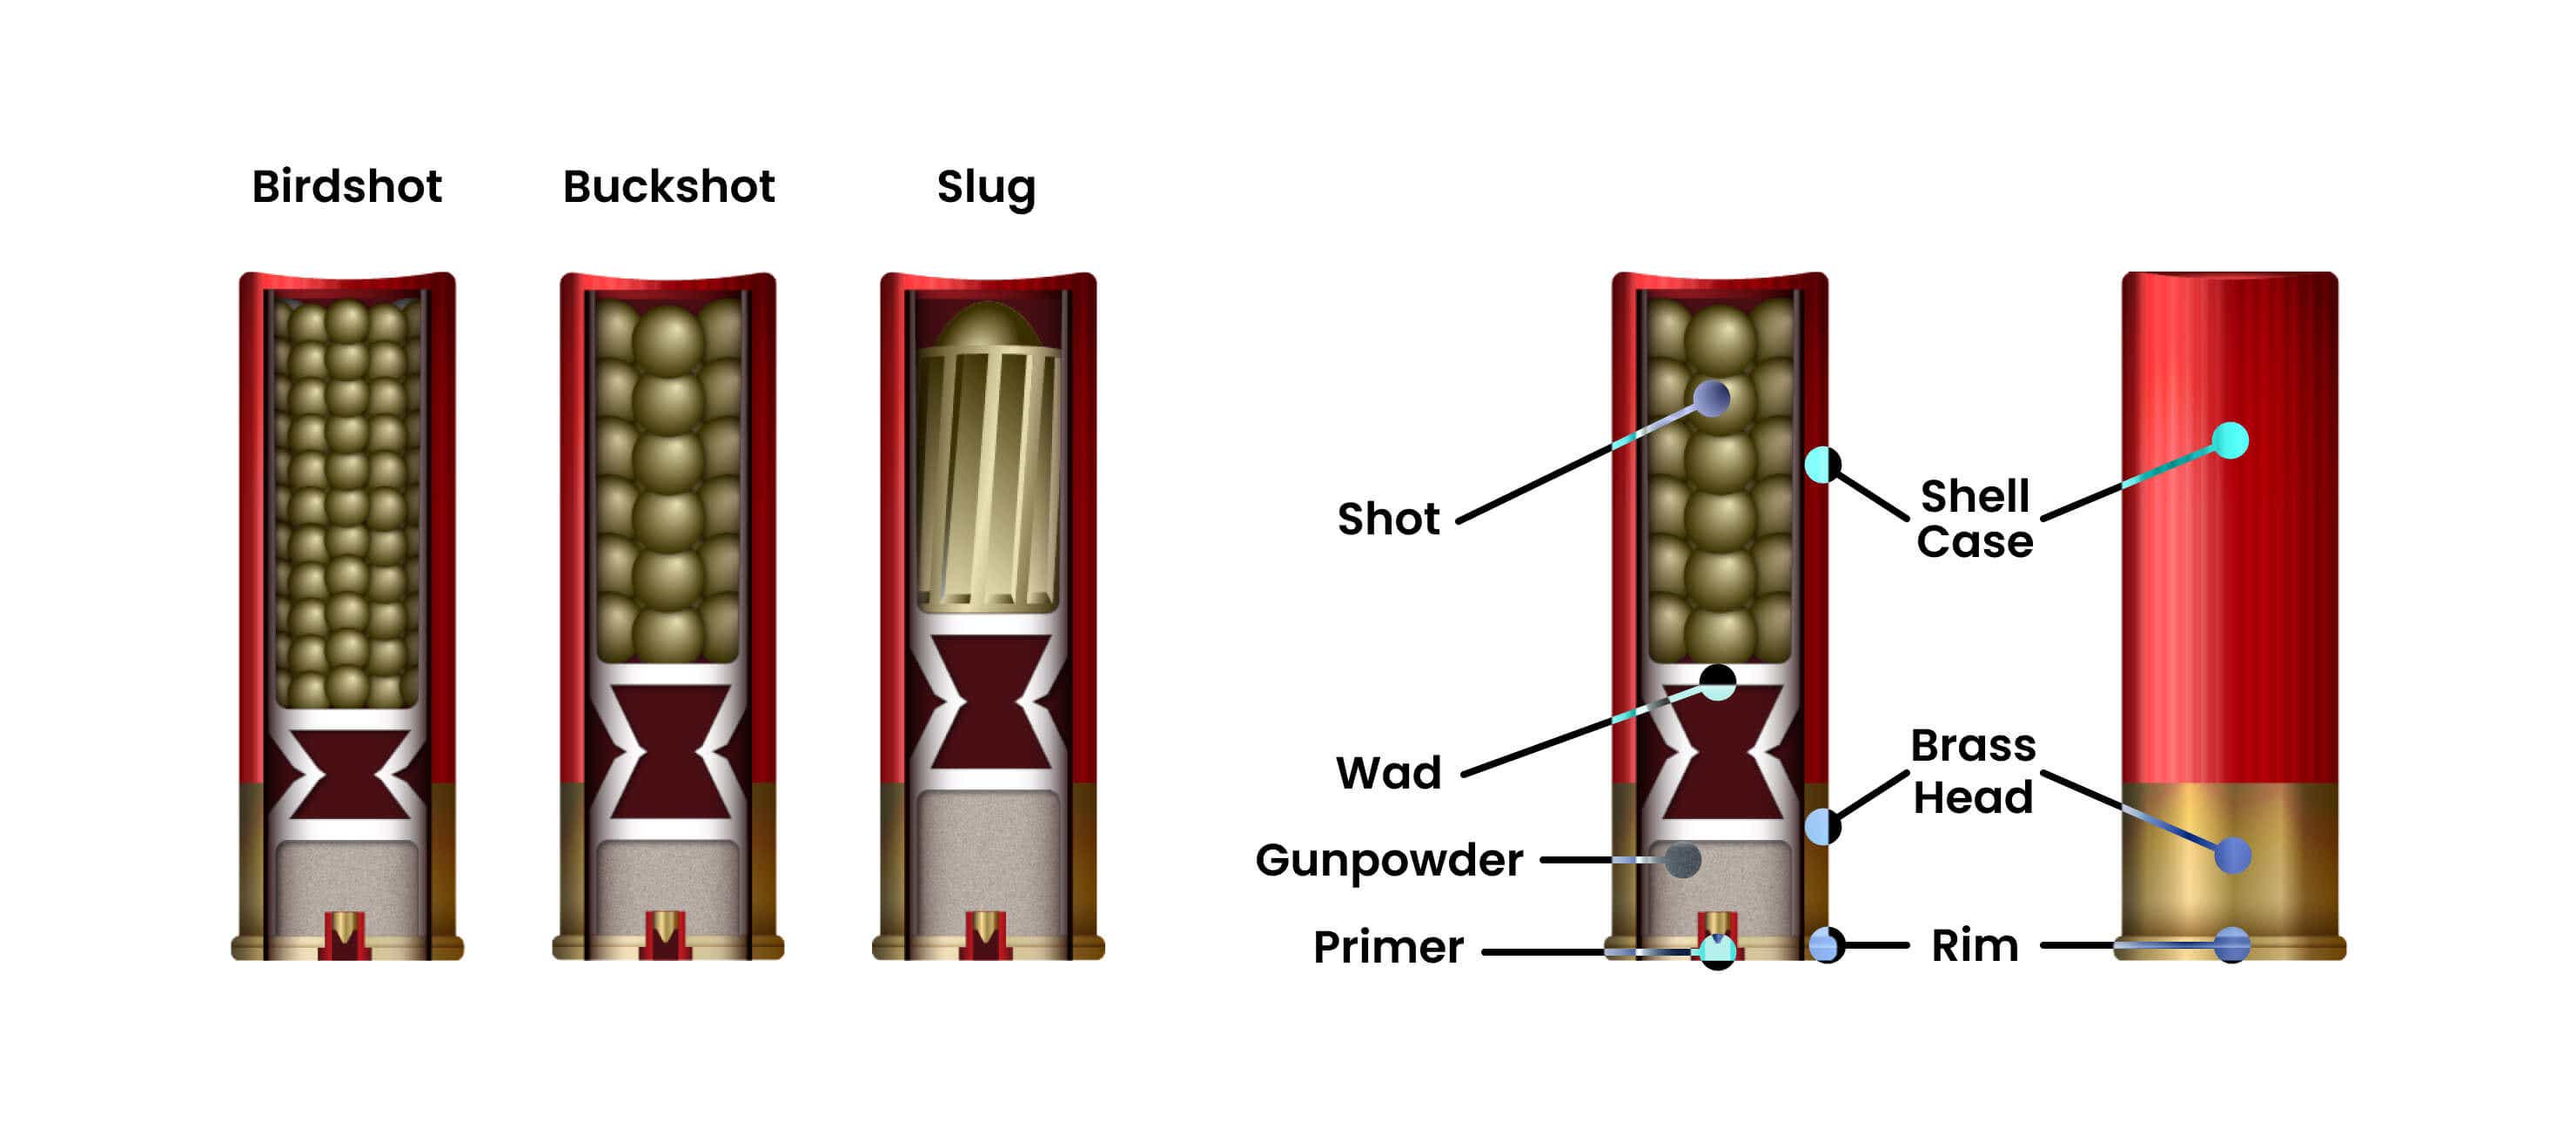 Anatomy of a shotgun shell & overview of the 3 different shot types